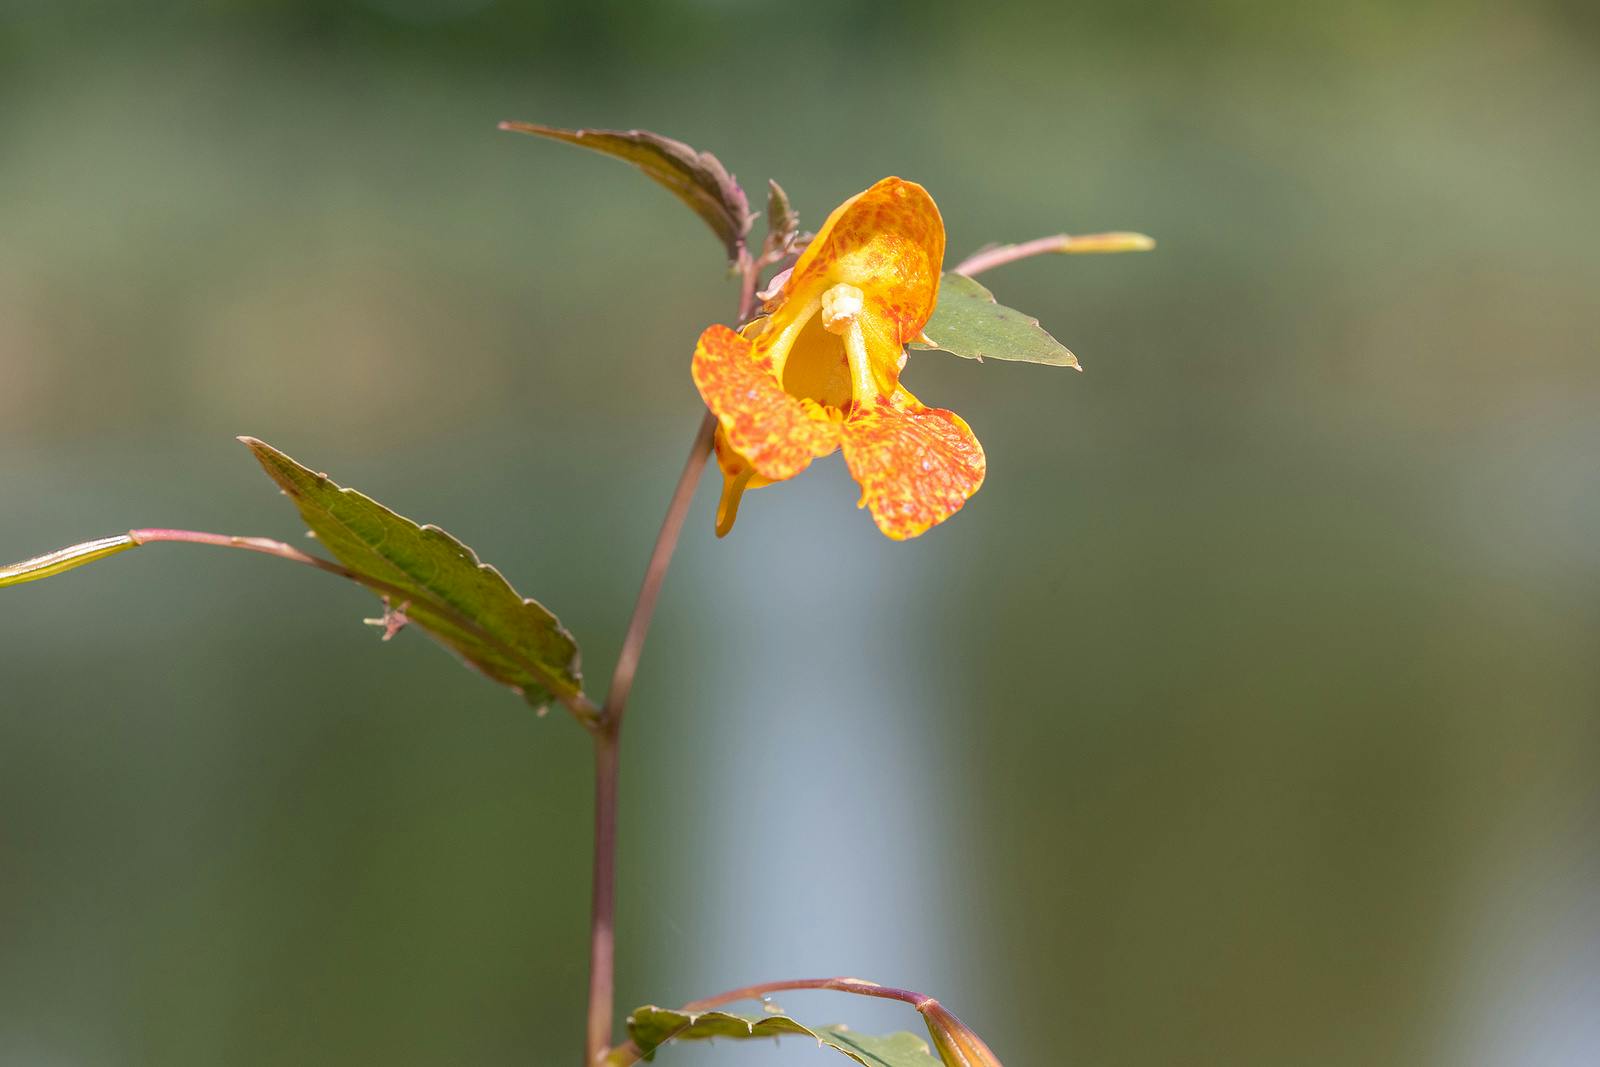 Jewel weed (Impatiens capensis) is a natural remedy for poison ivy